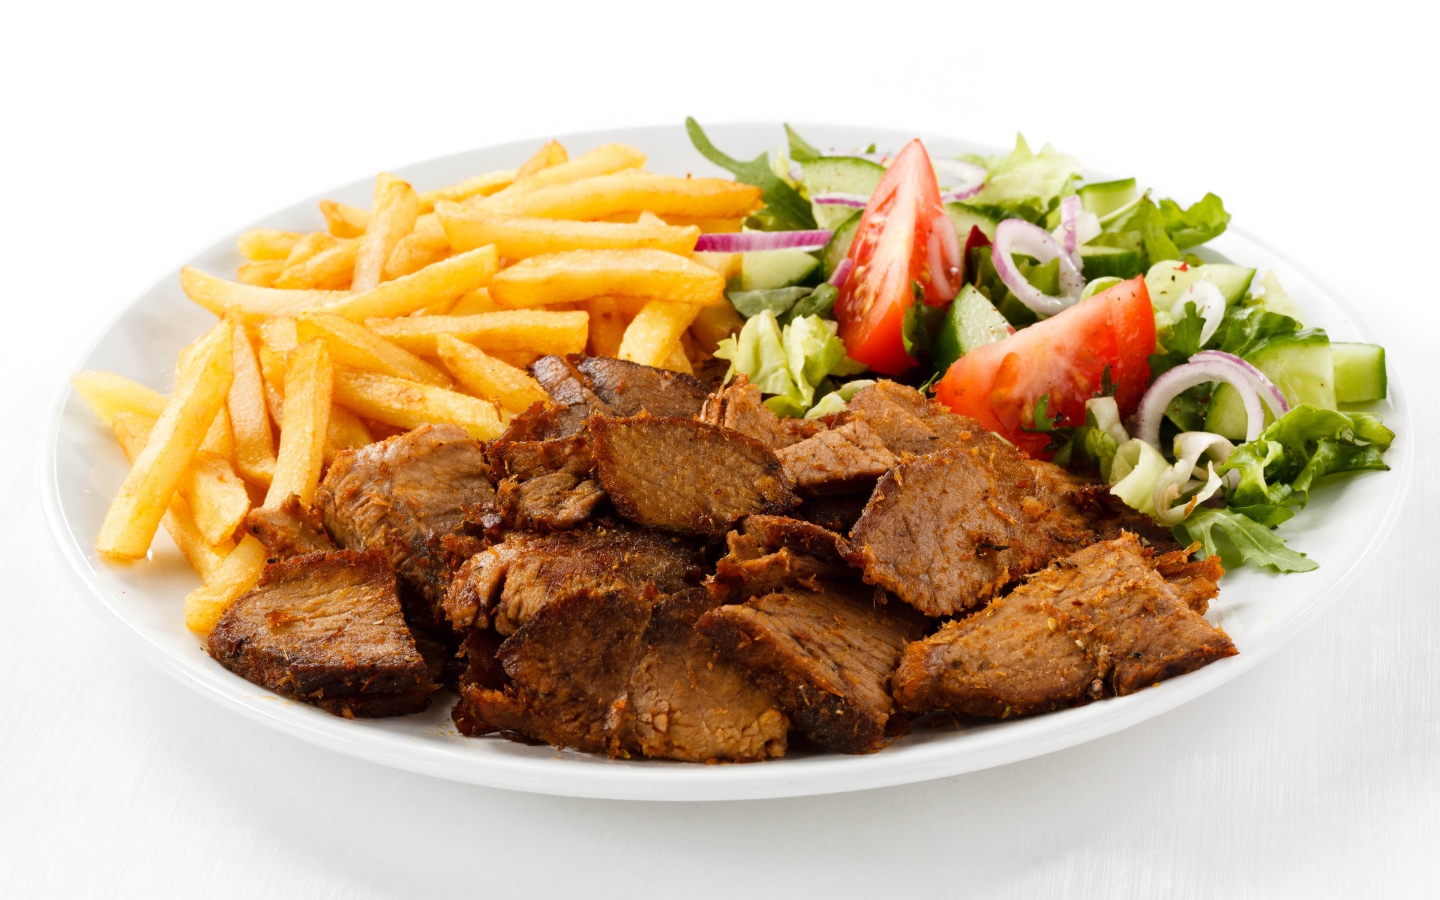 Slices of meat on a plate with french fries and salad